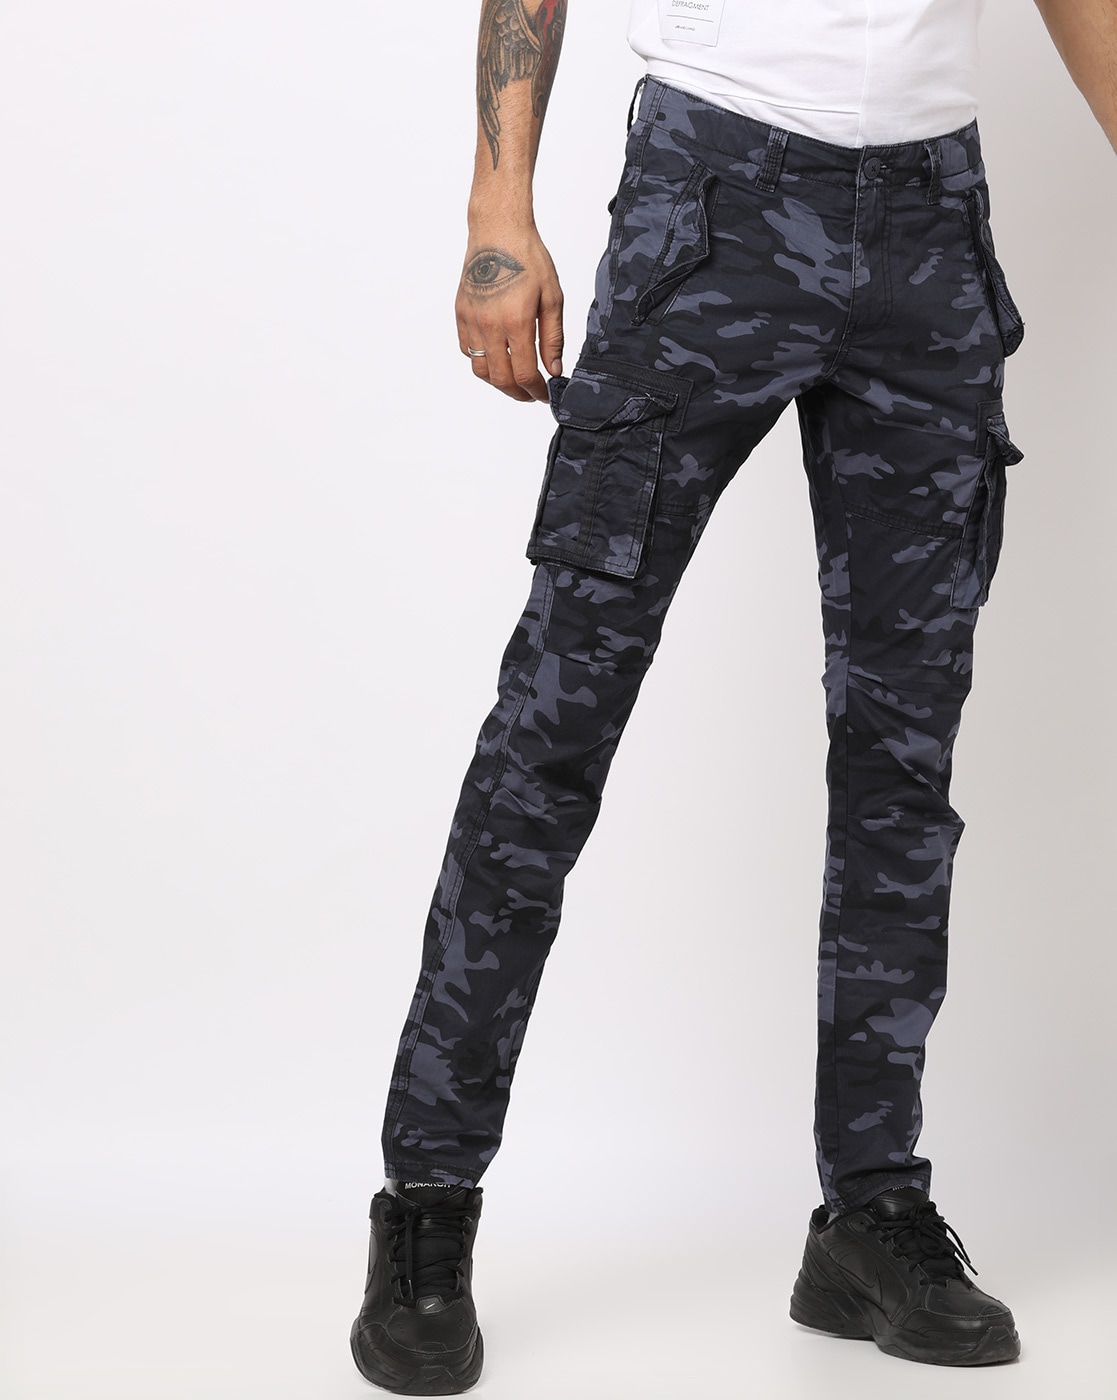 COPPER FIT MENS ARMY PRINTED CARGO LOWER